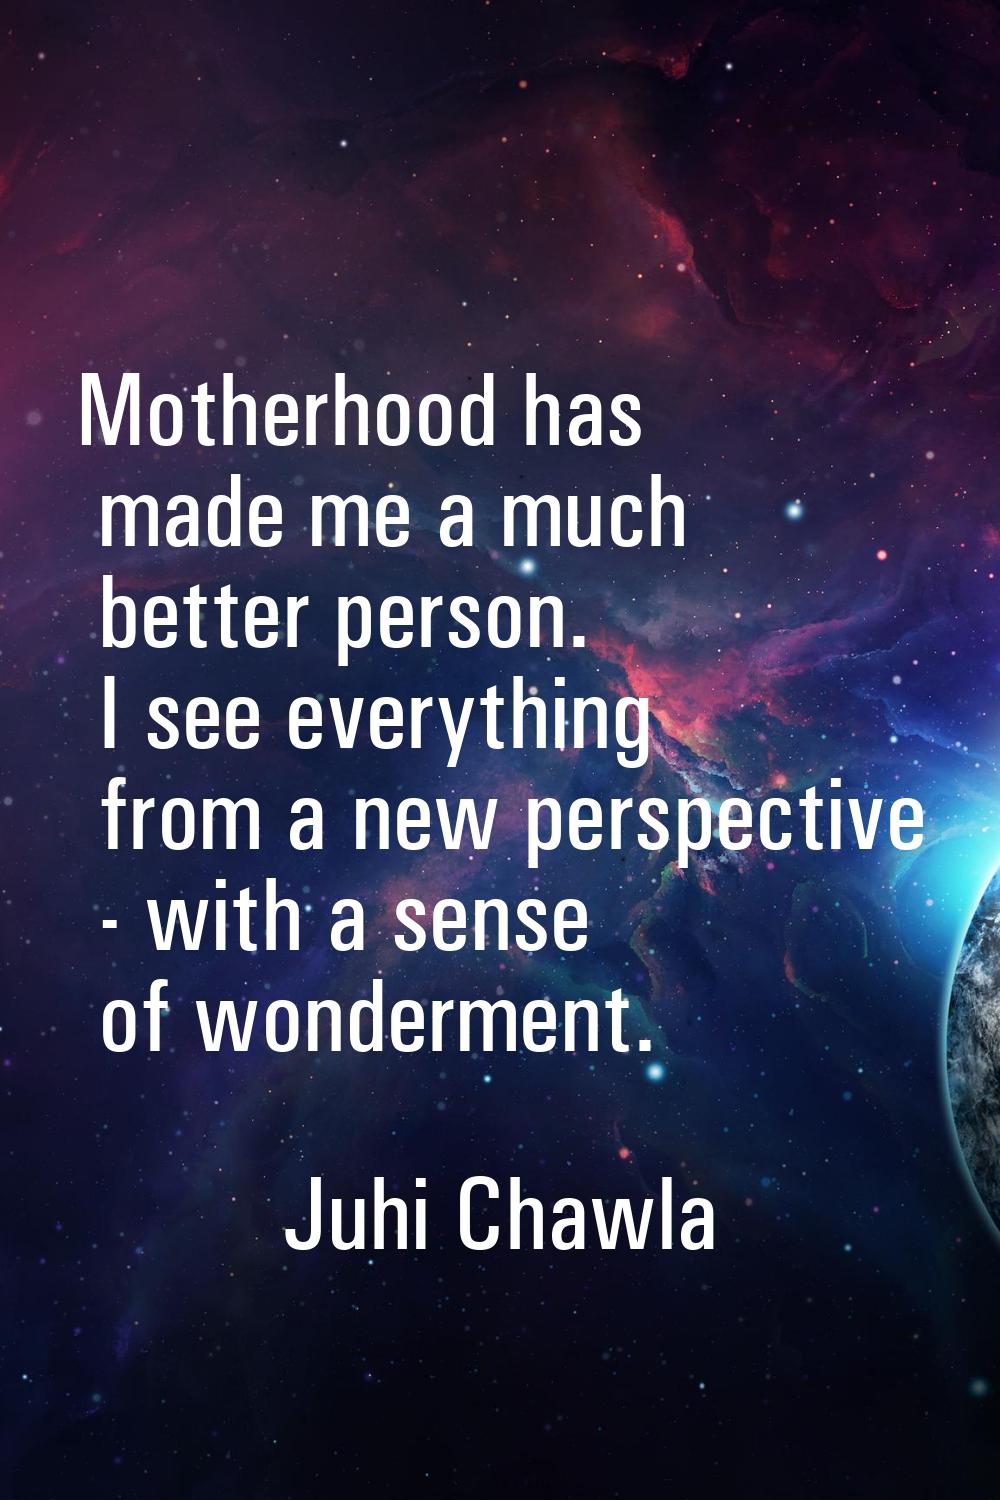 Motherhood has made me a much better person. I see everything from a new perspective - with a sense